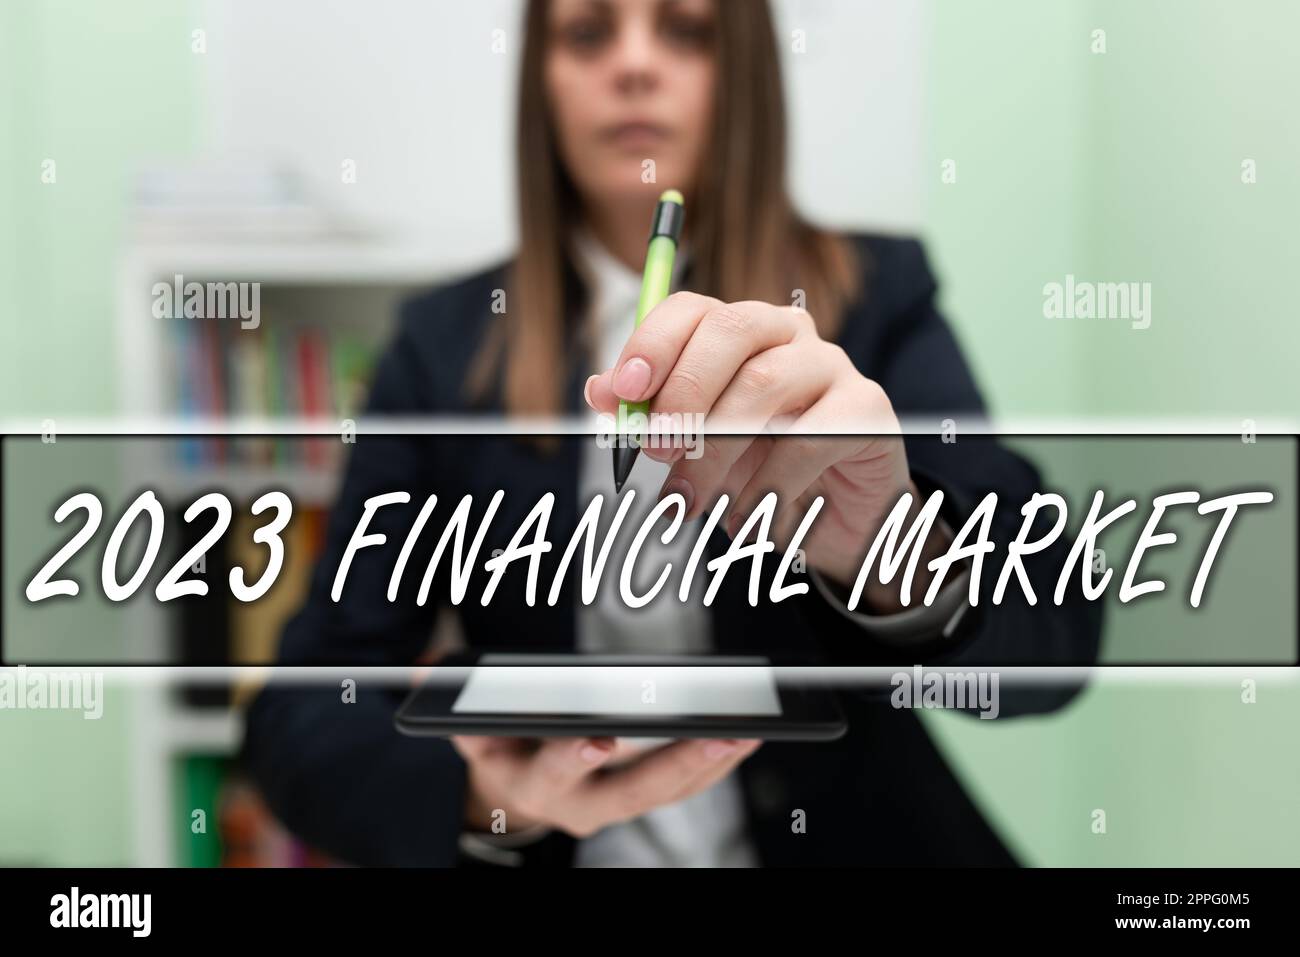 Handwriting text 2023 Financial Market. Word Written on place where trading of equities, bonds, currencies Stock Photo